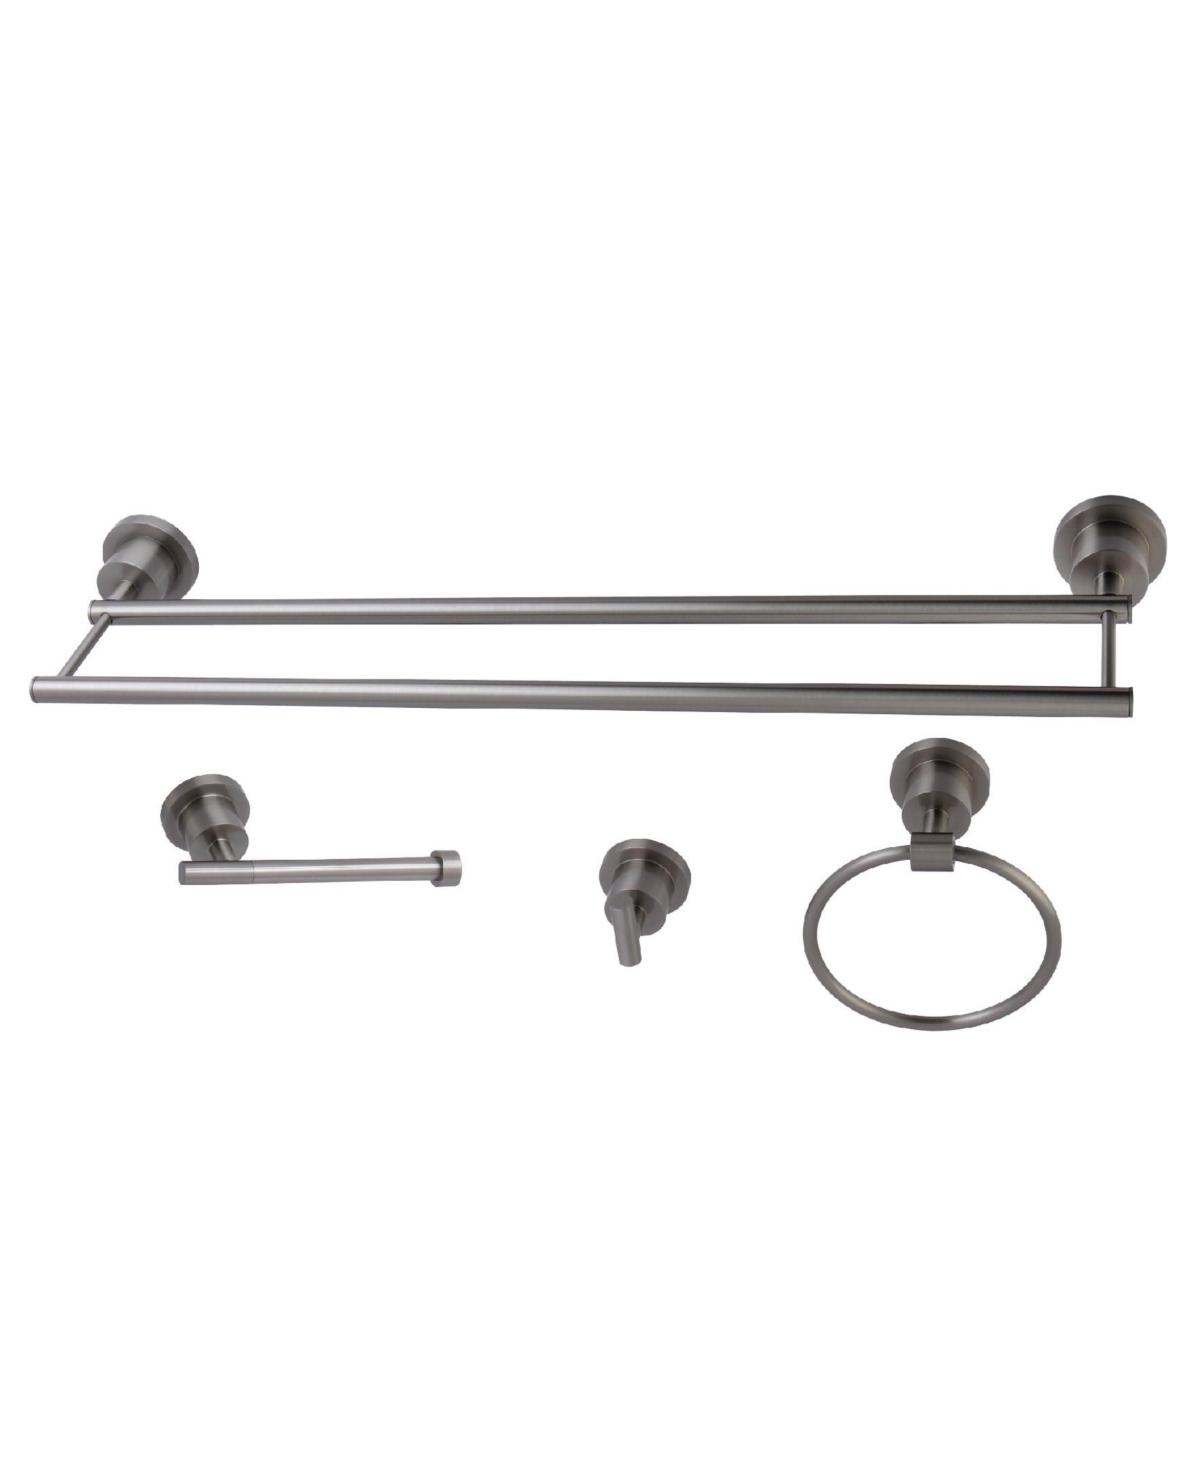 Kingston Brass Concord 4-Pc. Dual Towel Bar Bathroom Accessories Set in Brushed Nickel Bedding